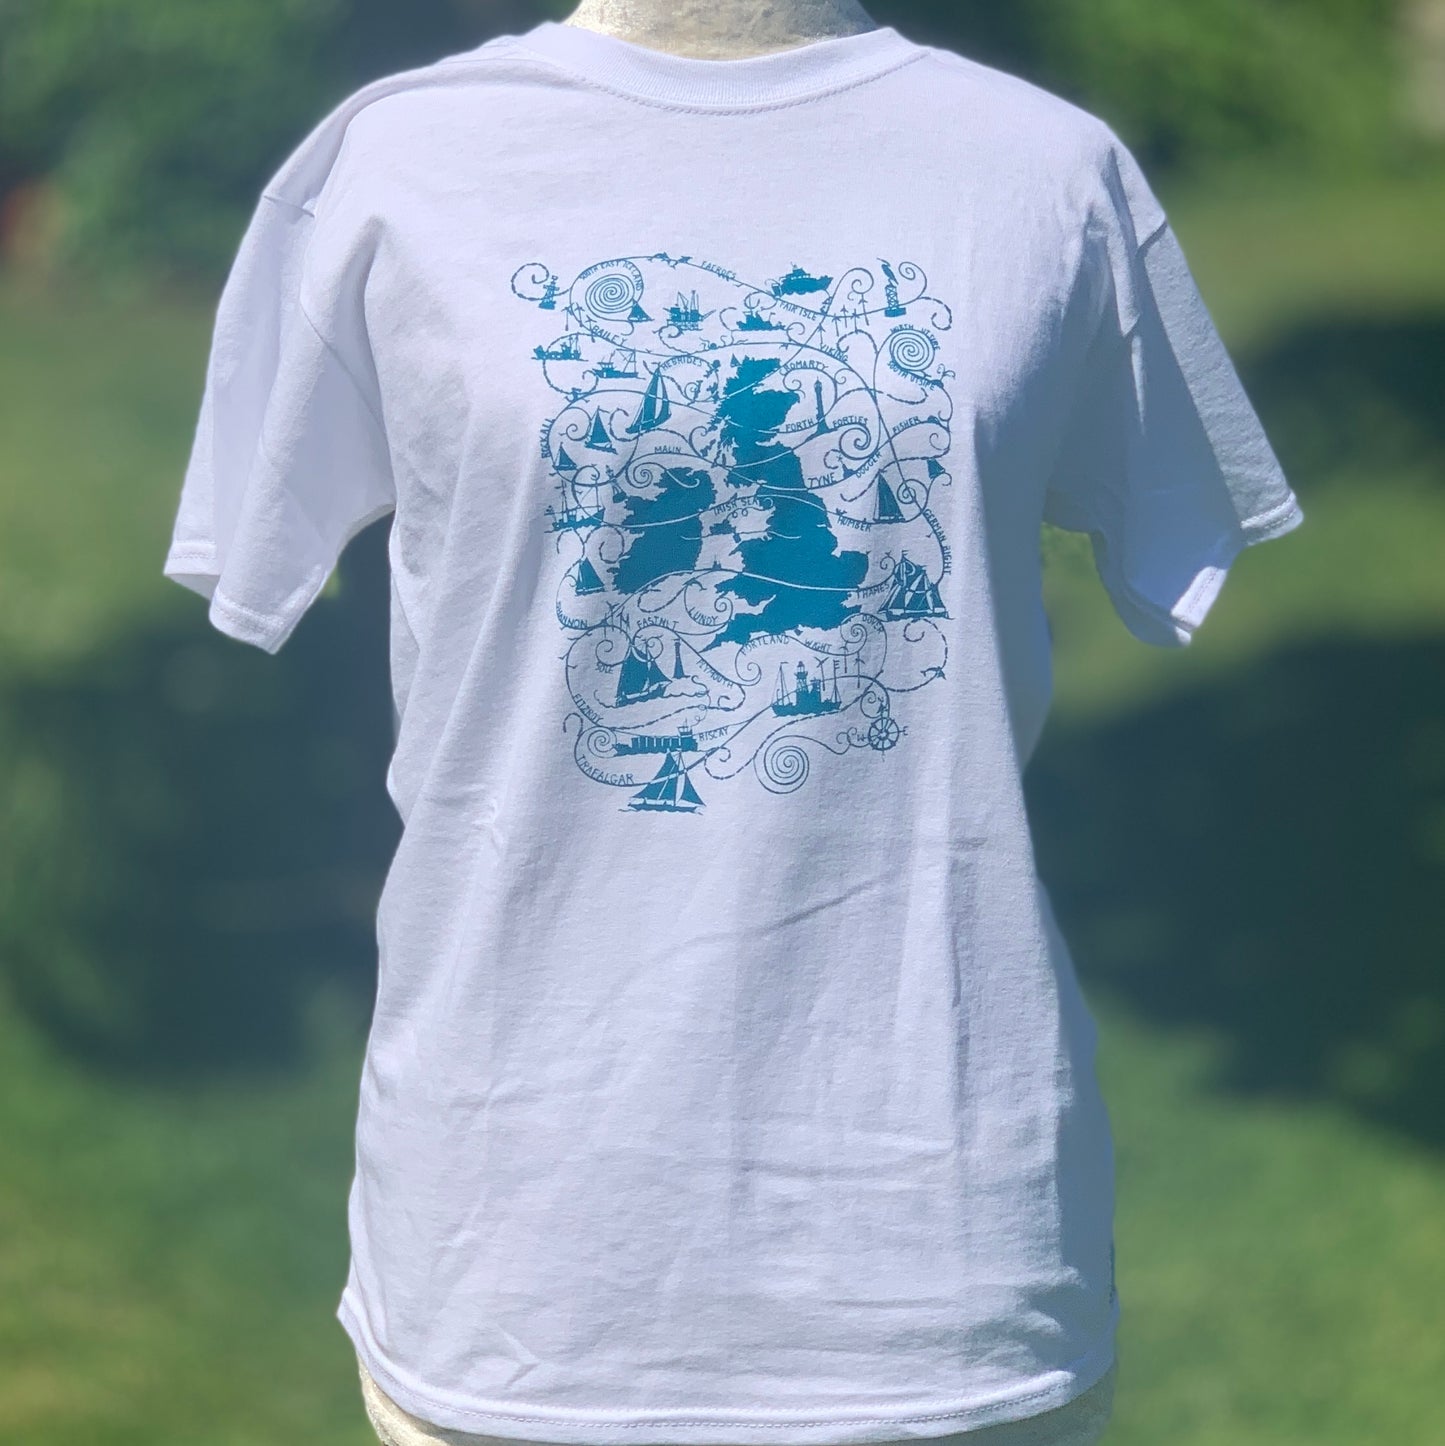 White T-shirt with turquoise blue design  UK map and shipping forecast names